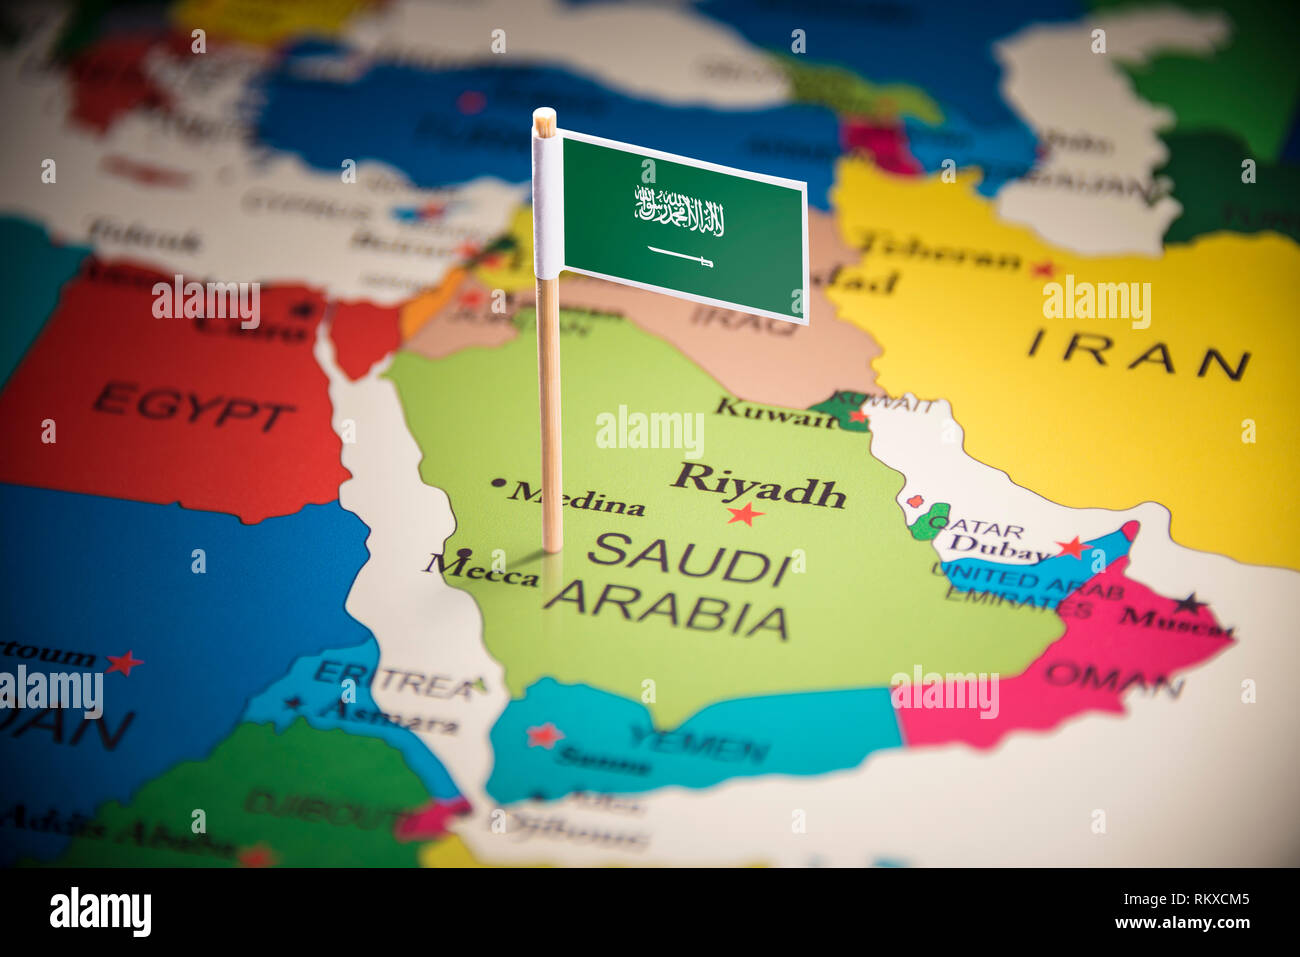 Saudi Arabia marked with a flag on the map Stock Photo